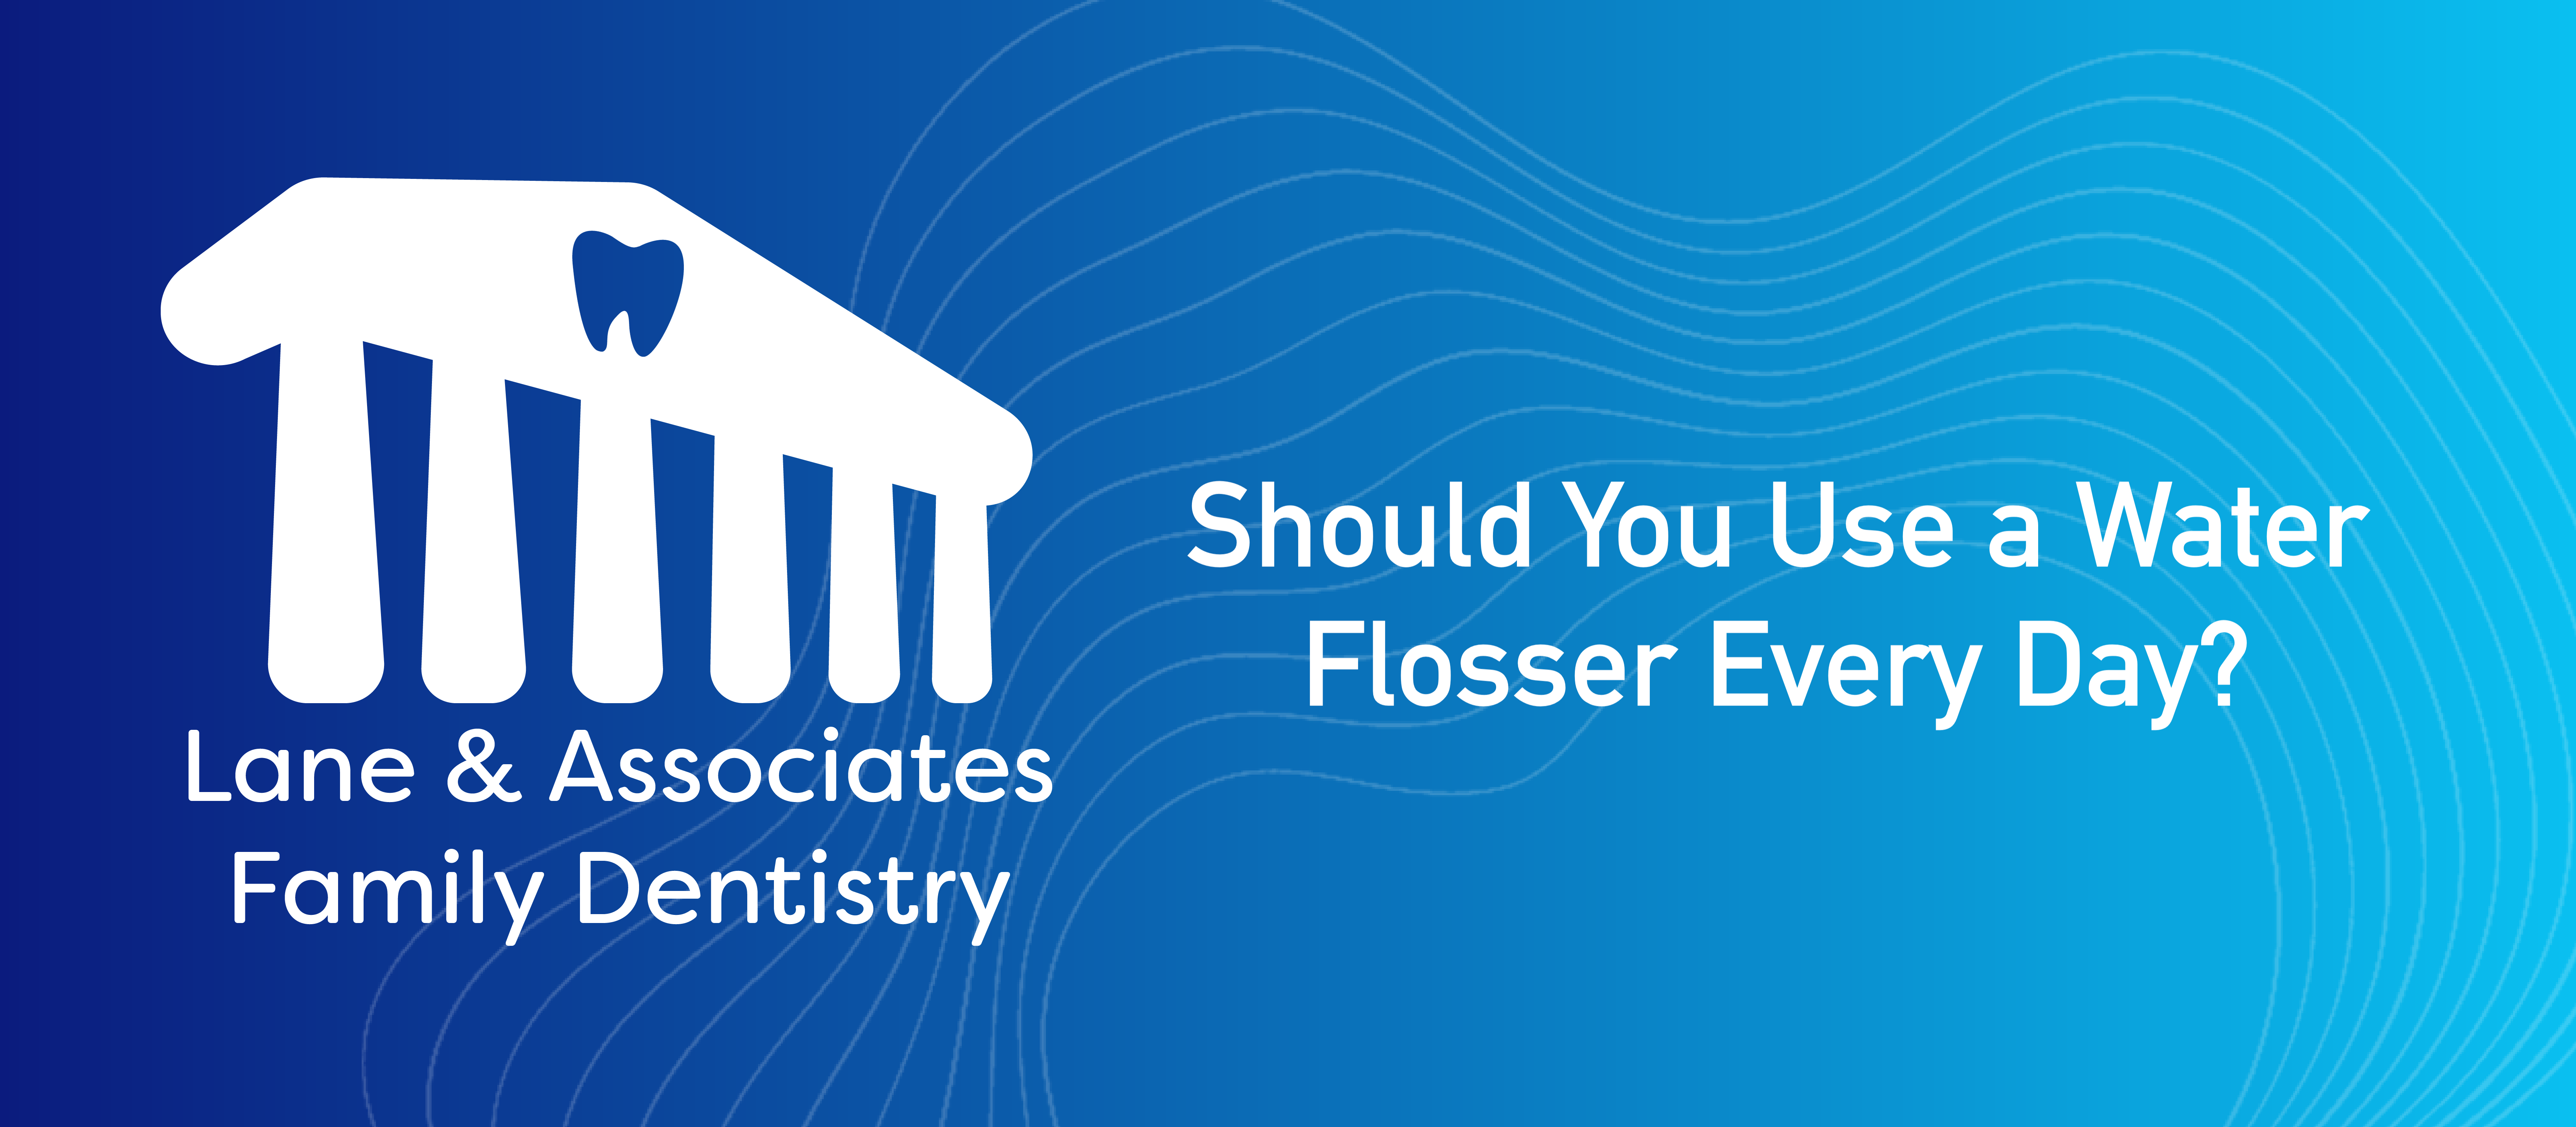 Should you use a water flosser every day